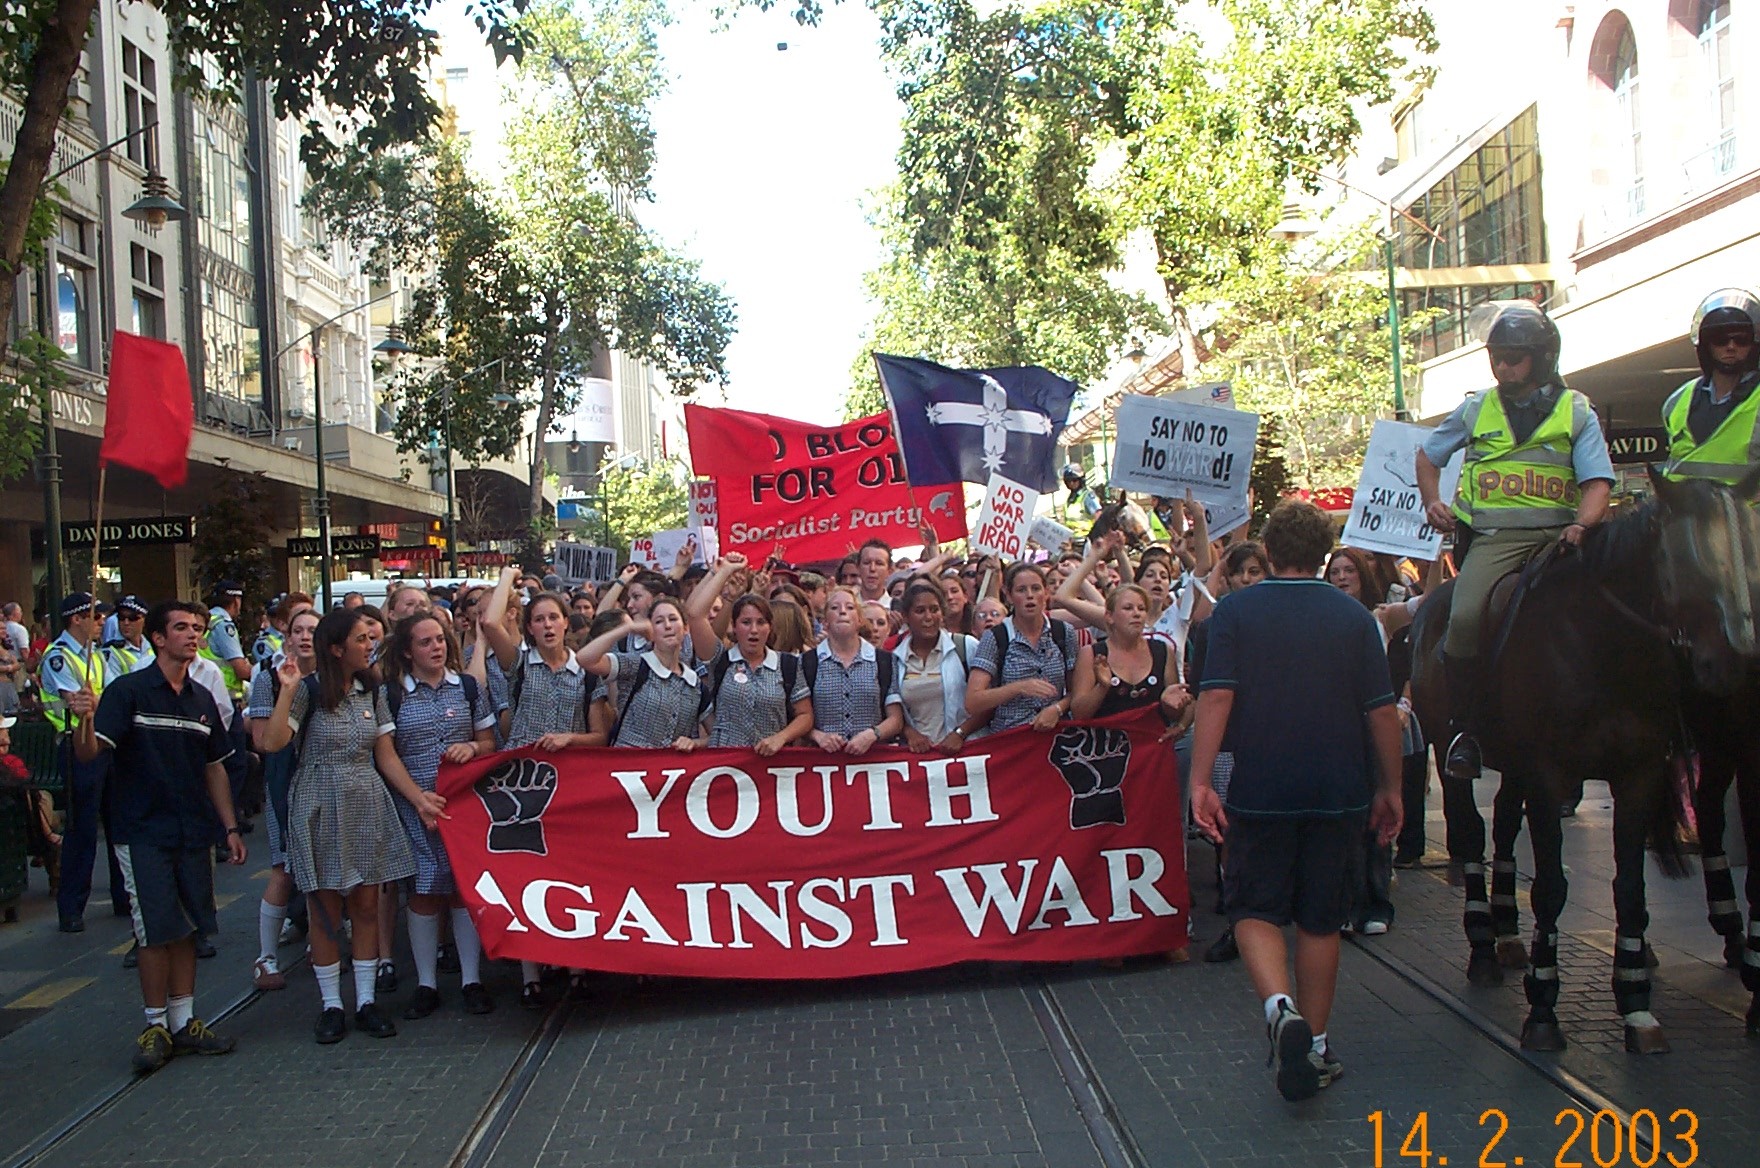 Protestors marching down street holding banners. The banner across the front marchers says Youth Against War